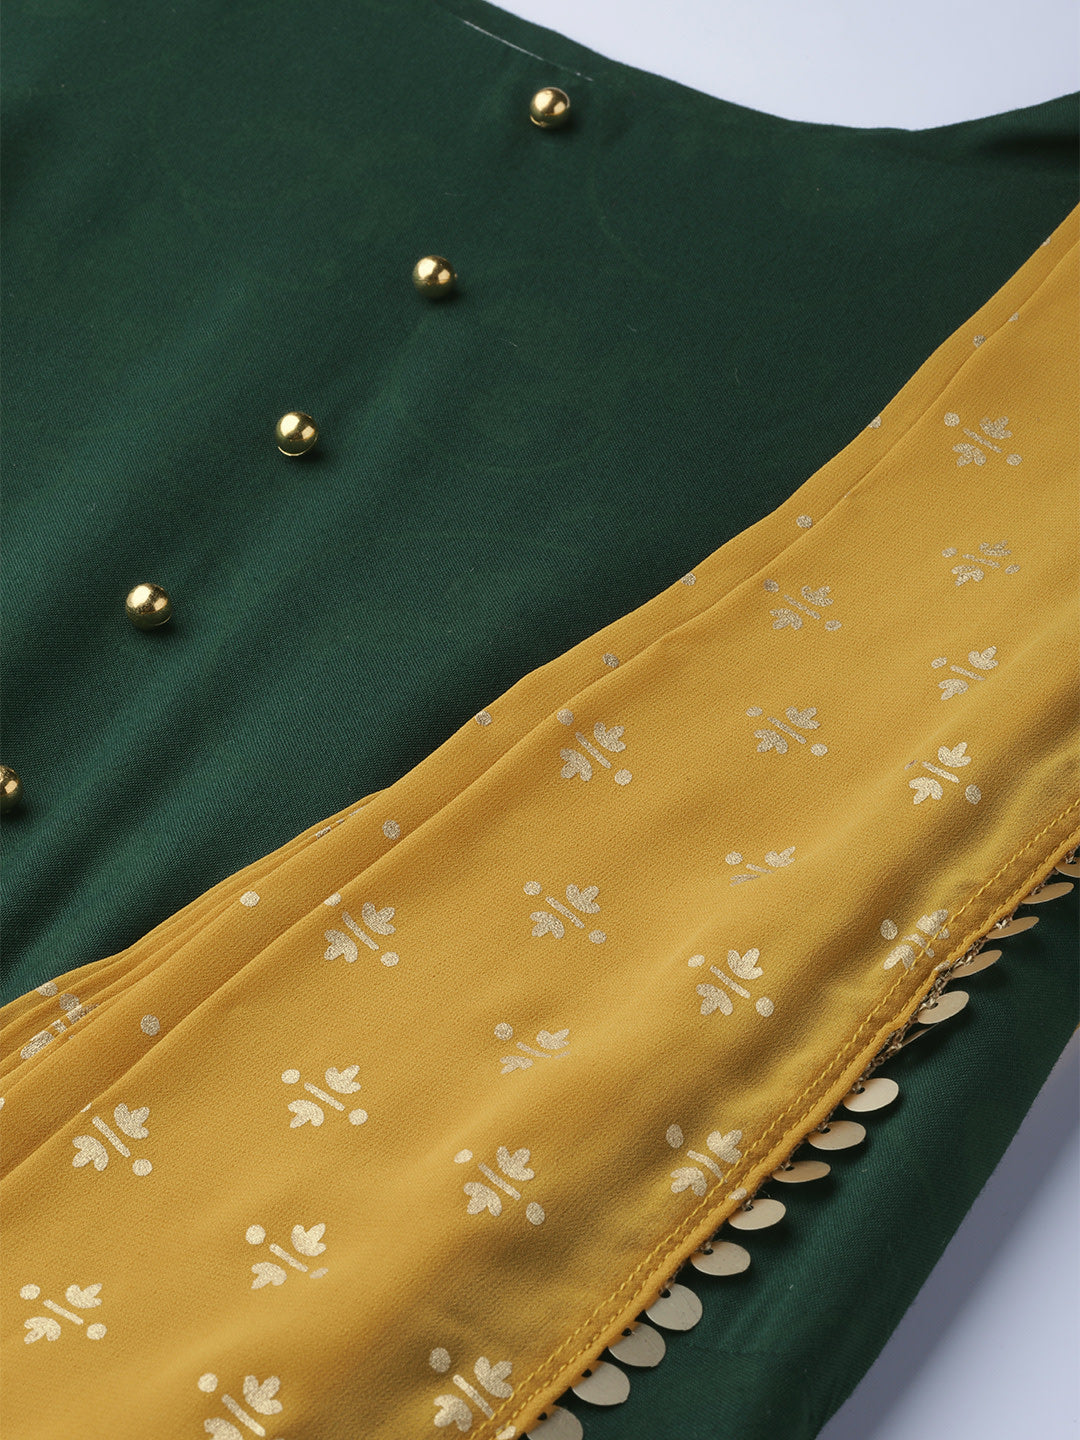 Green & Mustard Yellow Solid Maxi Dress With Attached Dupatta